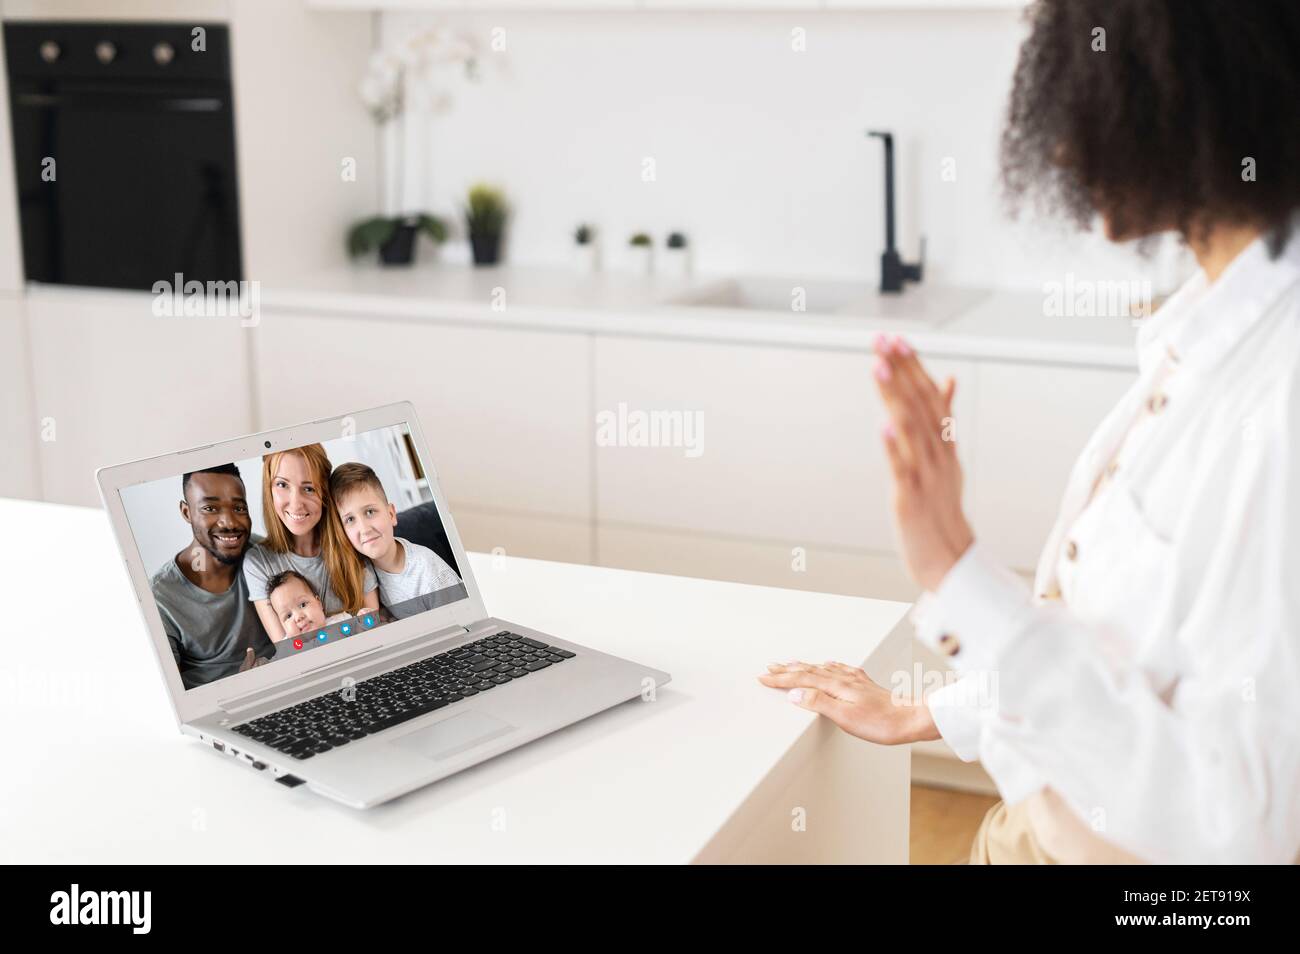 Focus on screen with happy multiracial family, making video call with grown up young daughter woman or sister, chatting communicating online using computer application, staying at home on isolation Stock Photo